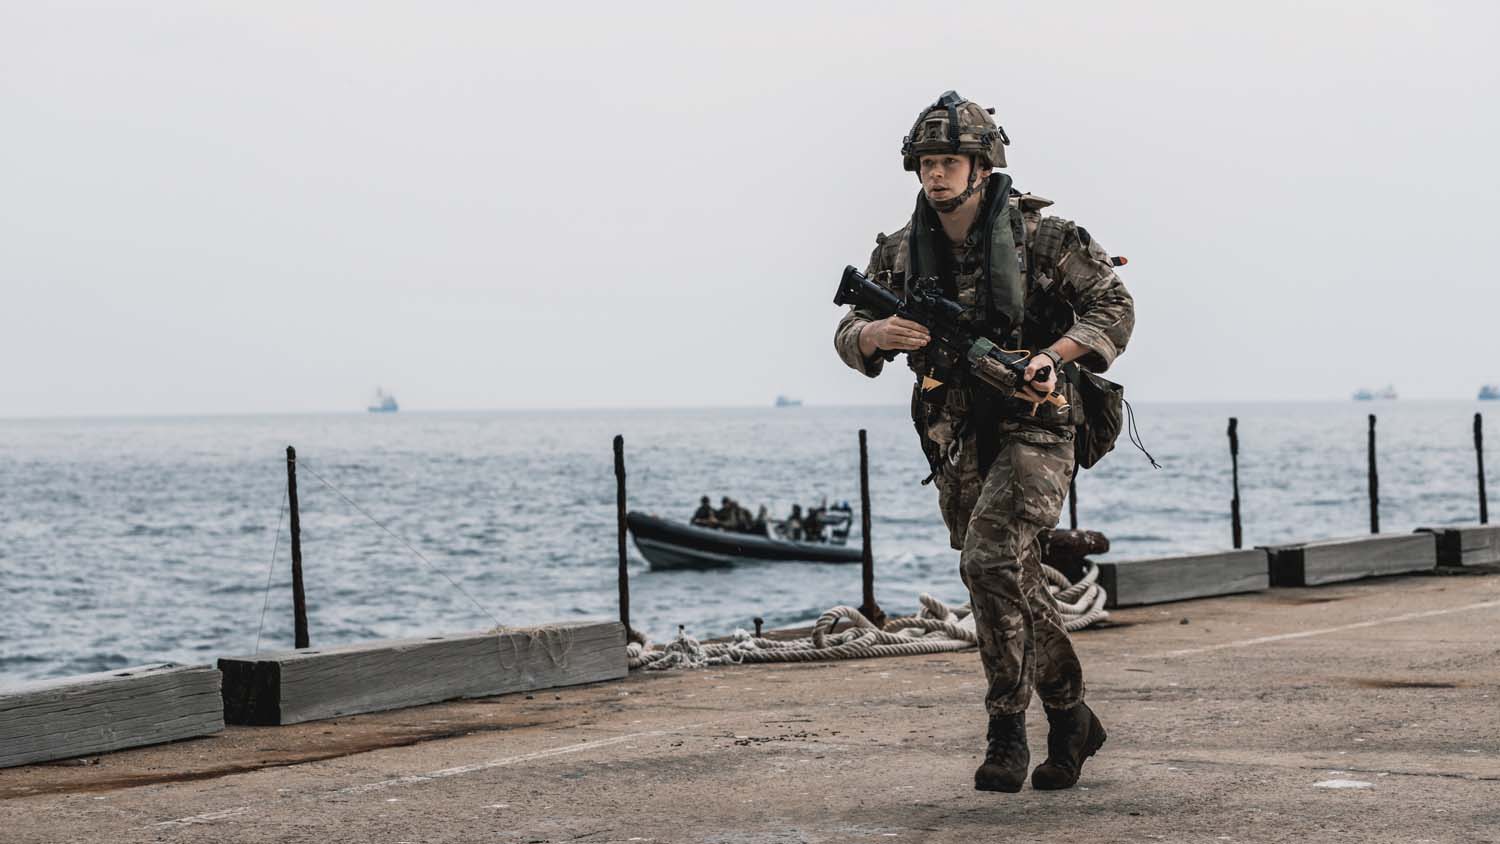 Royal Marines add new kit to daring exercises in Gibraltar